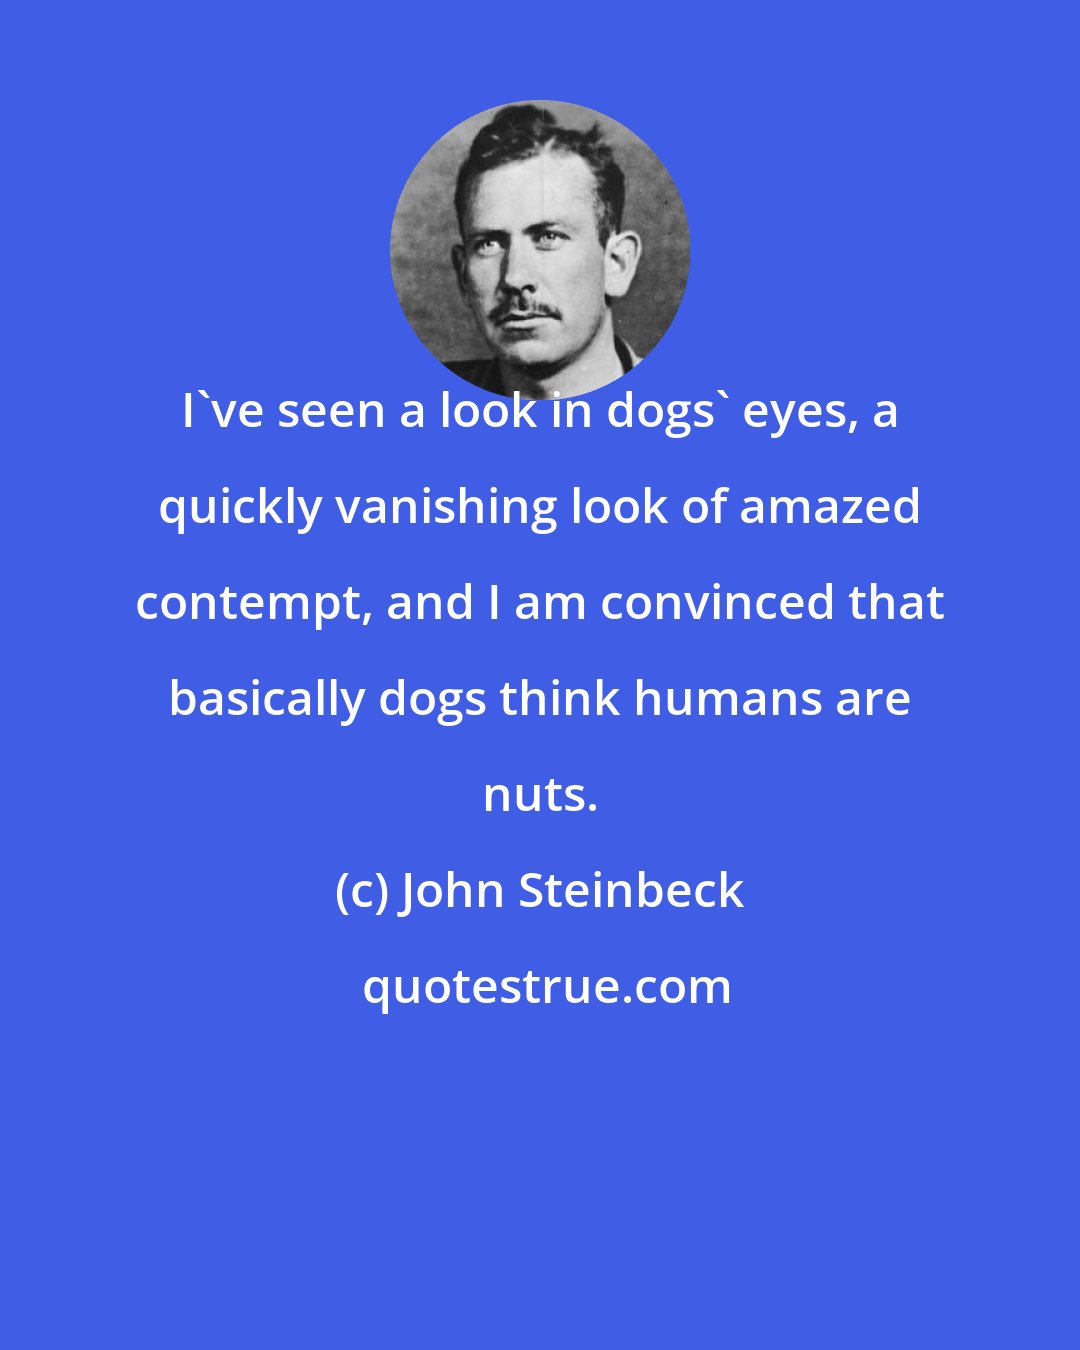 John Steinbeck: I've seen a look in dogs' eyes, a quickly vanishing look of amazed contempt, and I am convinced that basically dogs think humans are nuts.